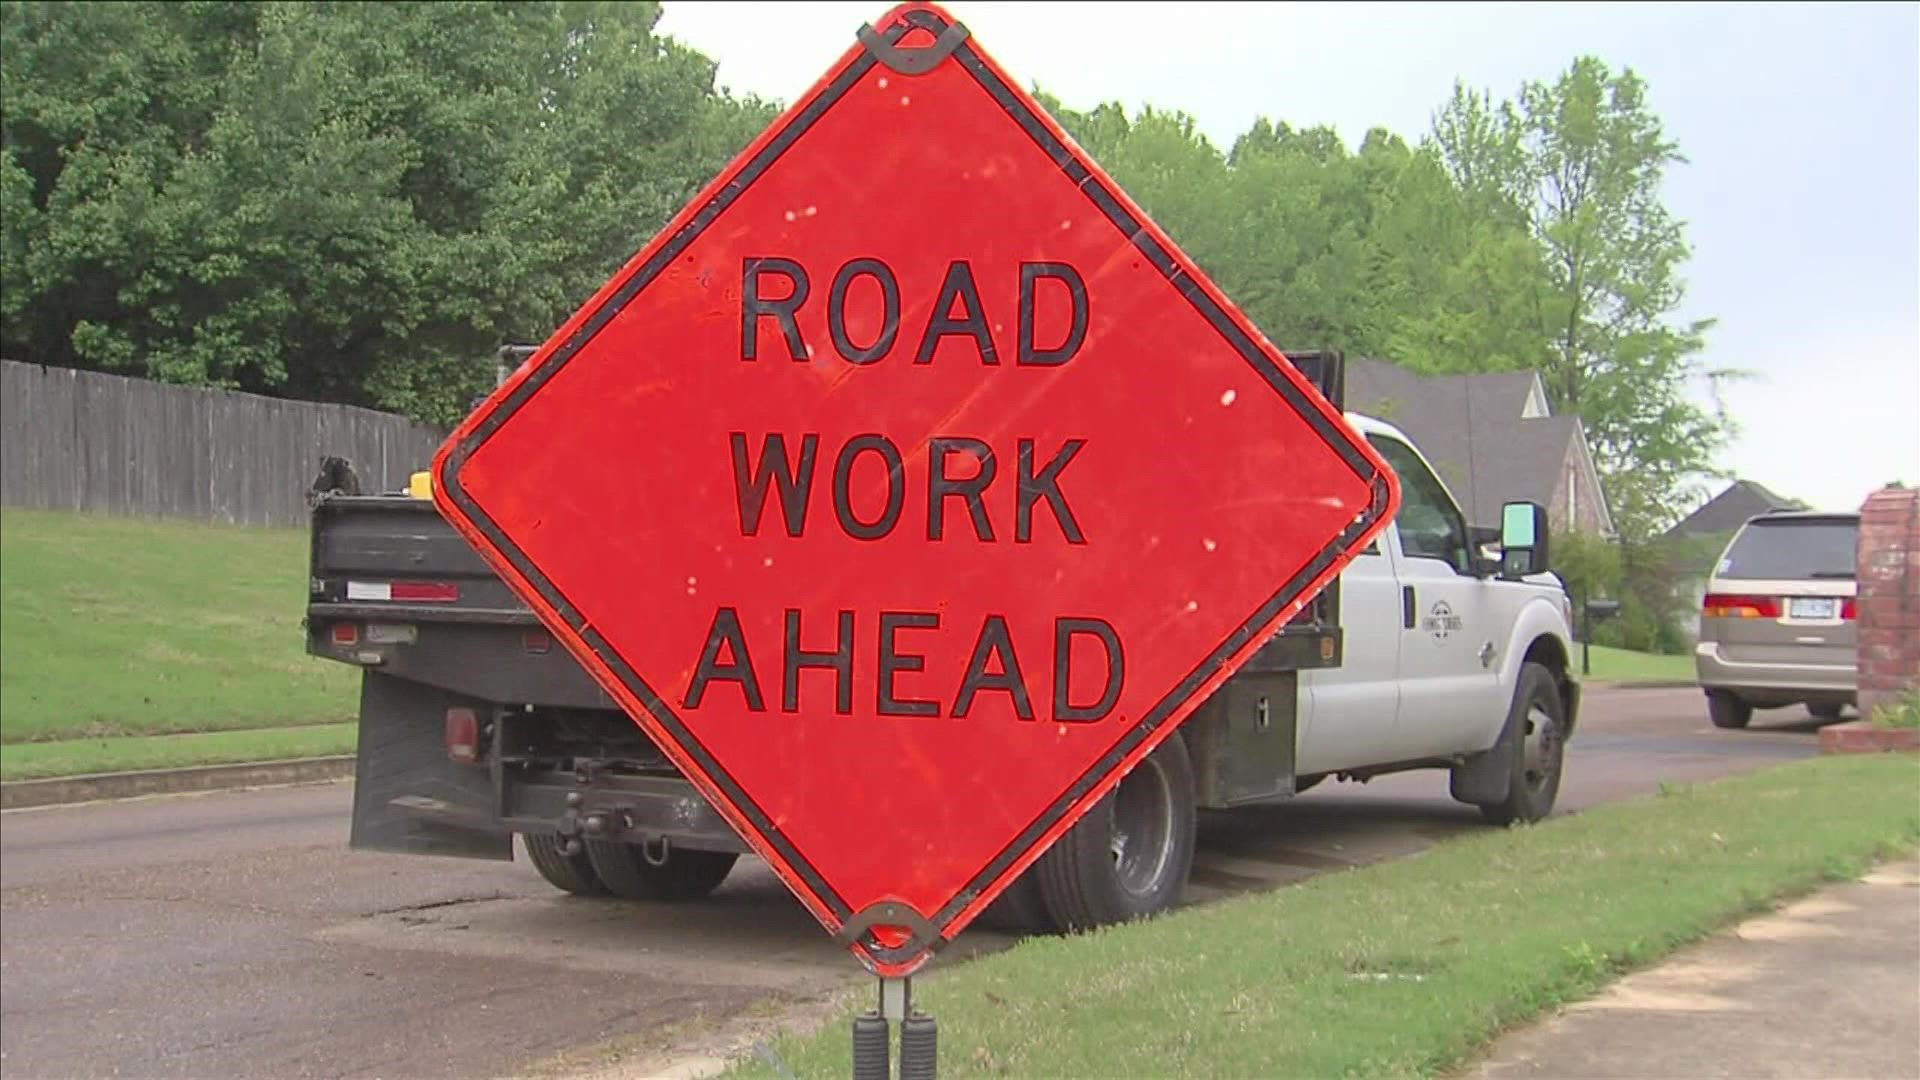 The Public Works Division said the project was slightly delayed due to recent weather, but once completed, about 4.5% of the town’s roads will be repaved.